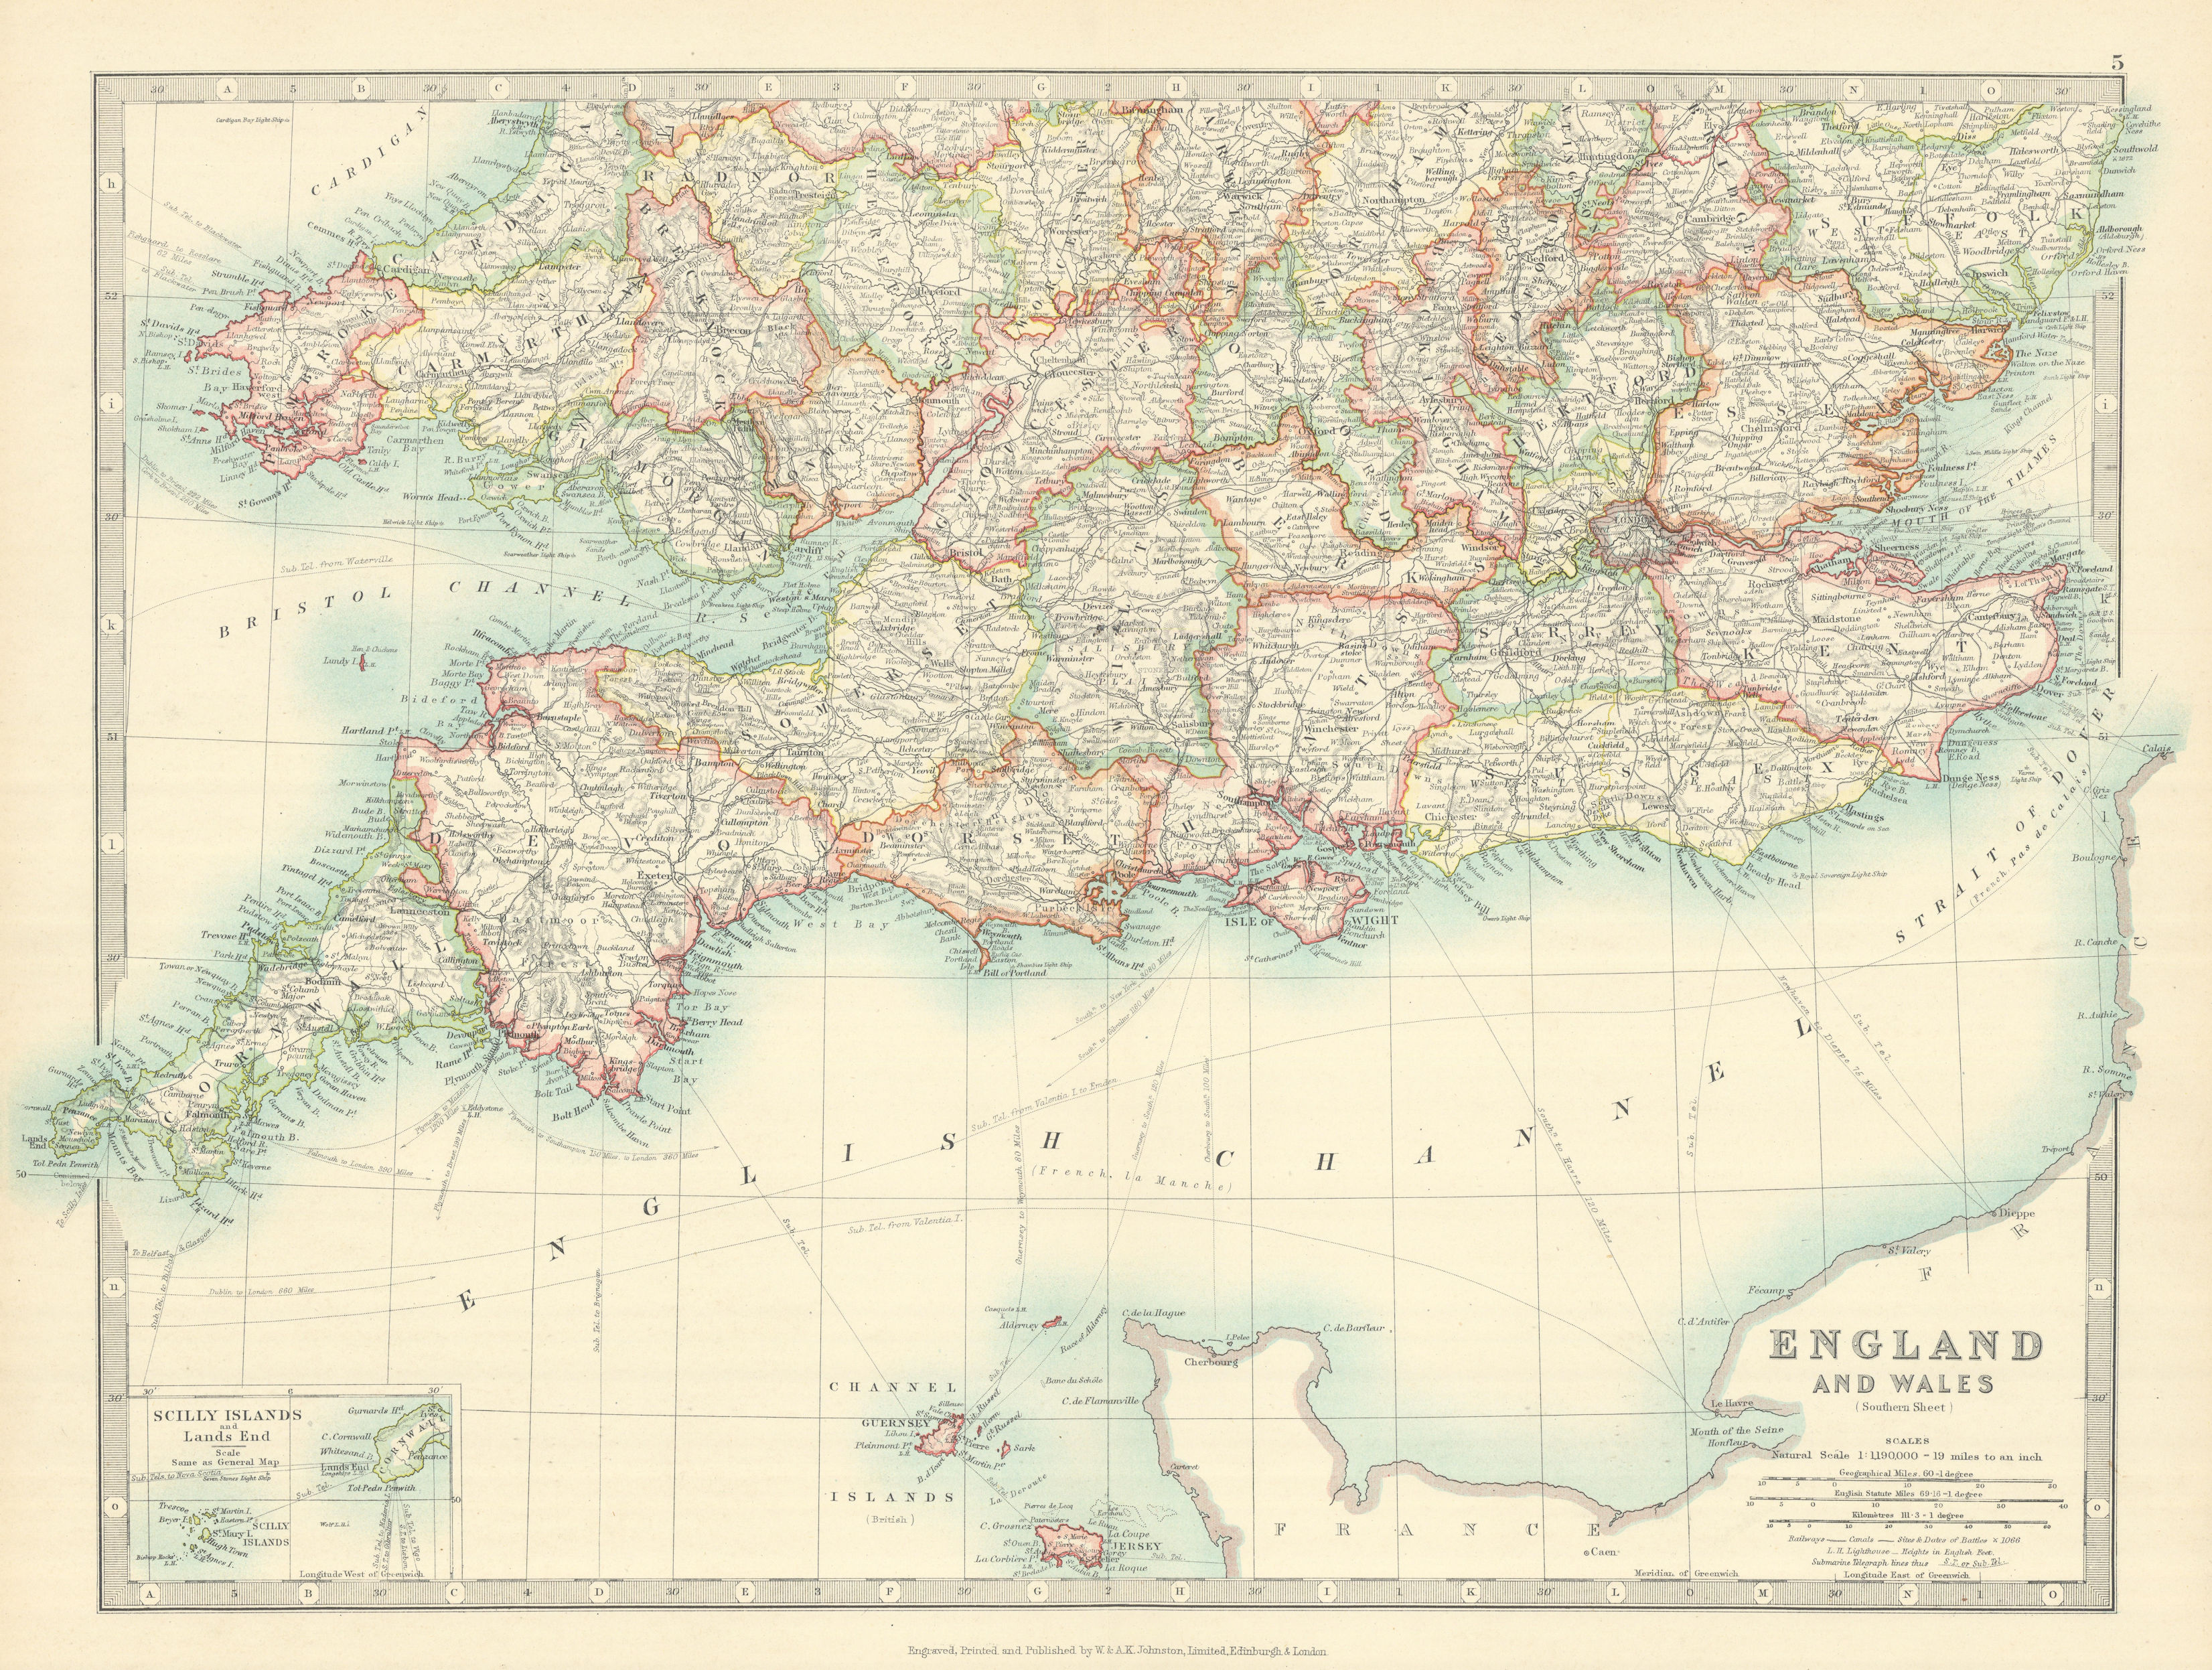 Associate Product SOUTHERN ENGLAND & WALES. Shows Worcestershire enclaves. JOHNSTON 1913 old map